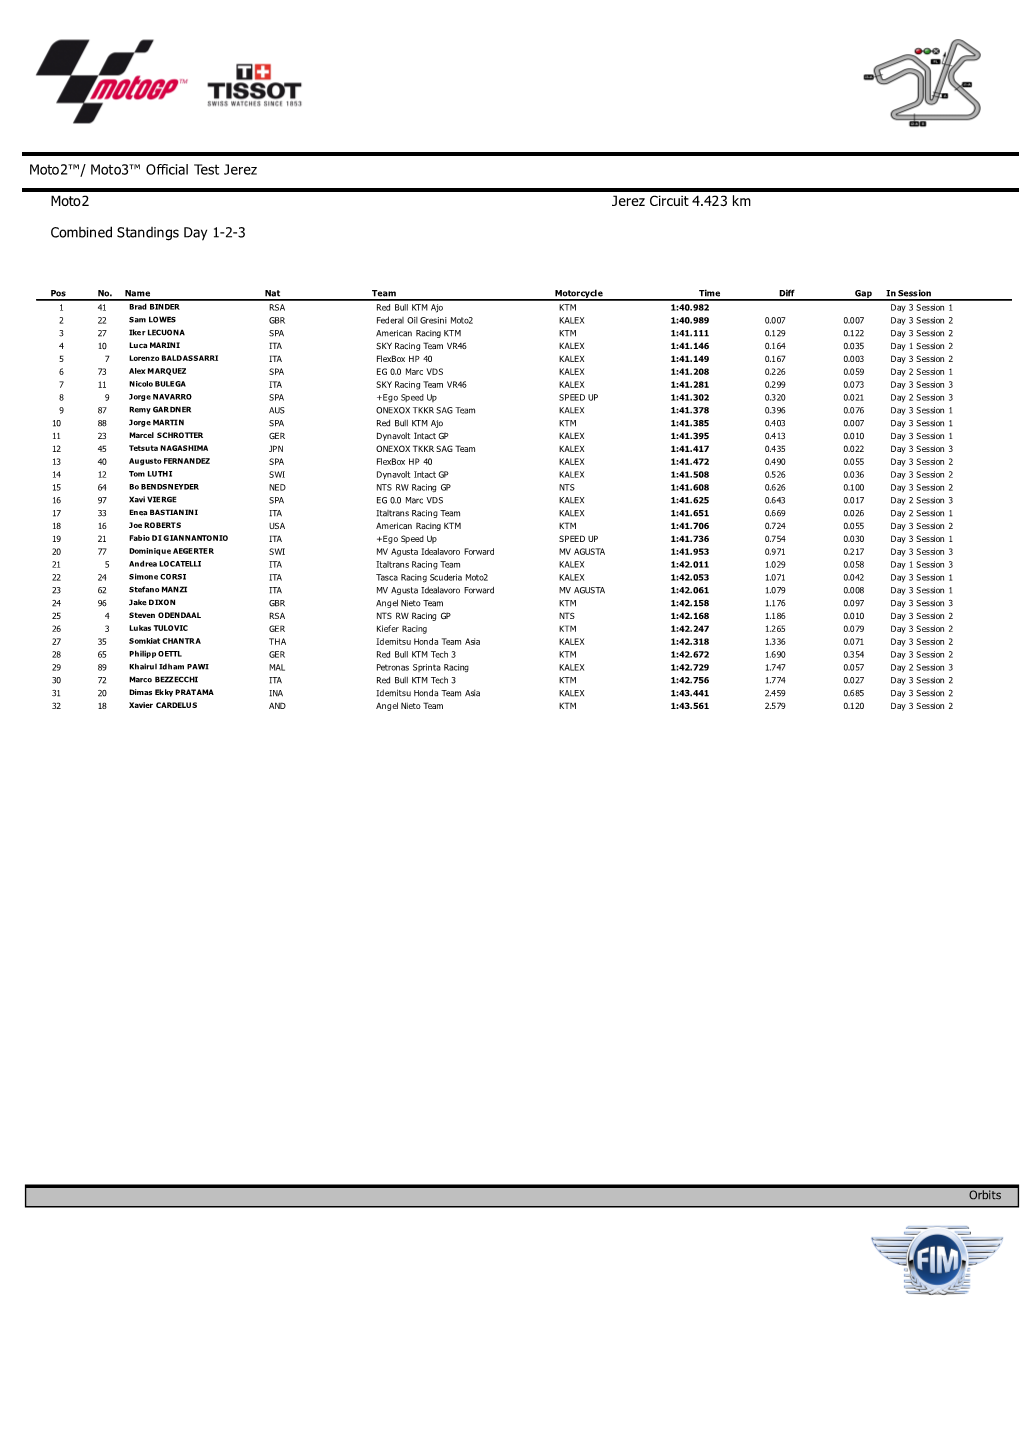 Moto2™/ Moto3™ Official Test Jerez Moto2 Combined Standings Day 1